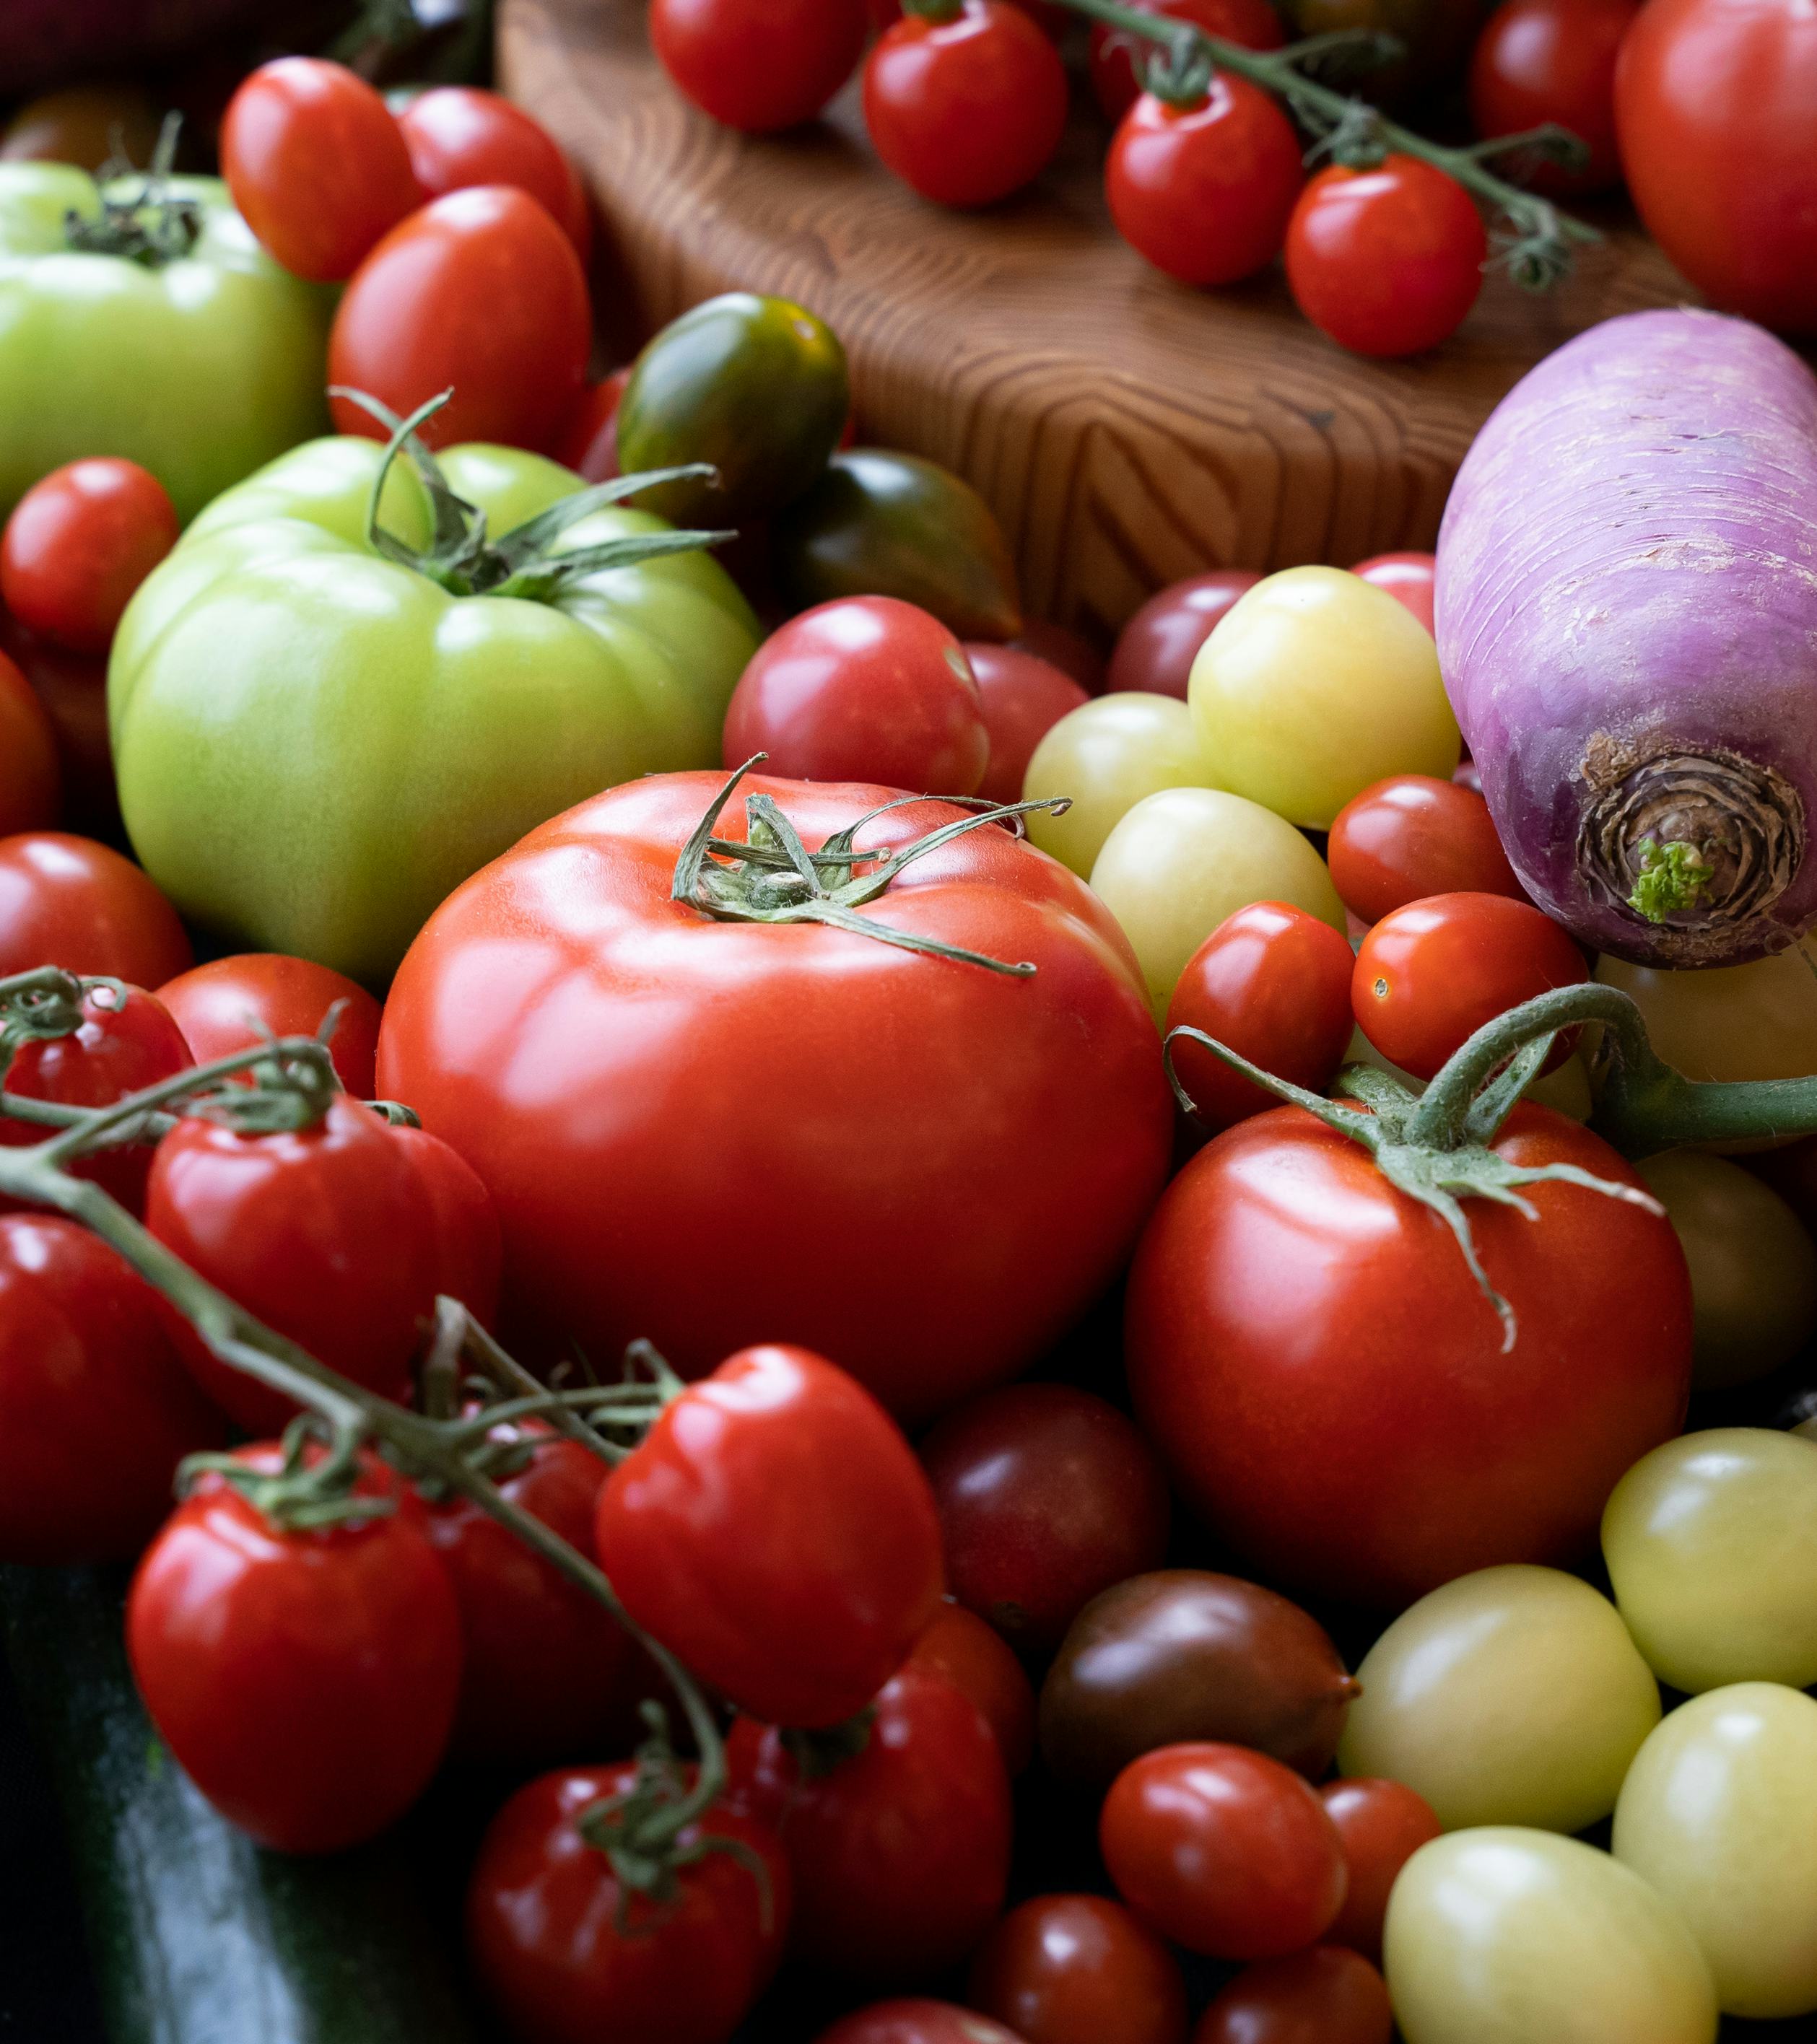 A mix of large, small, red and green tomatoes, and a purple turnip.